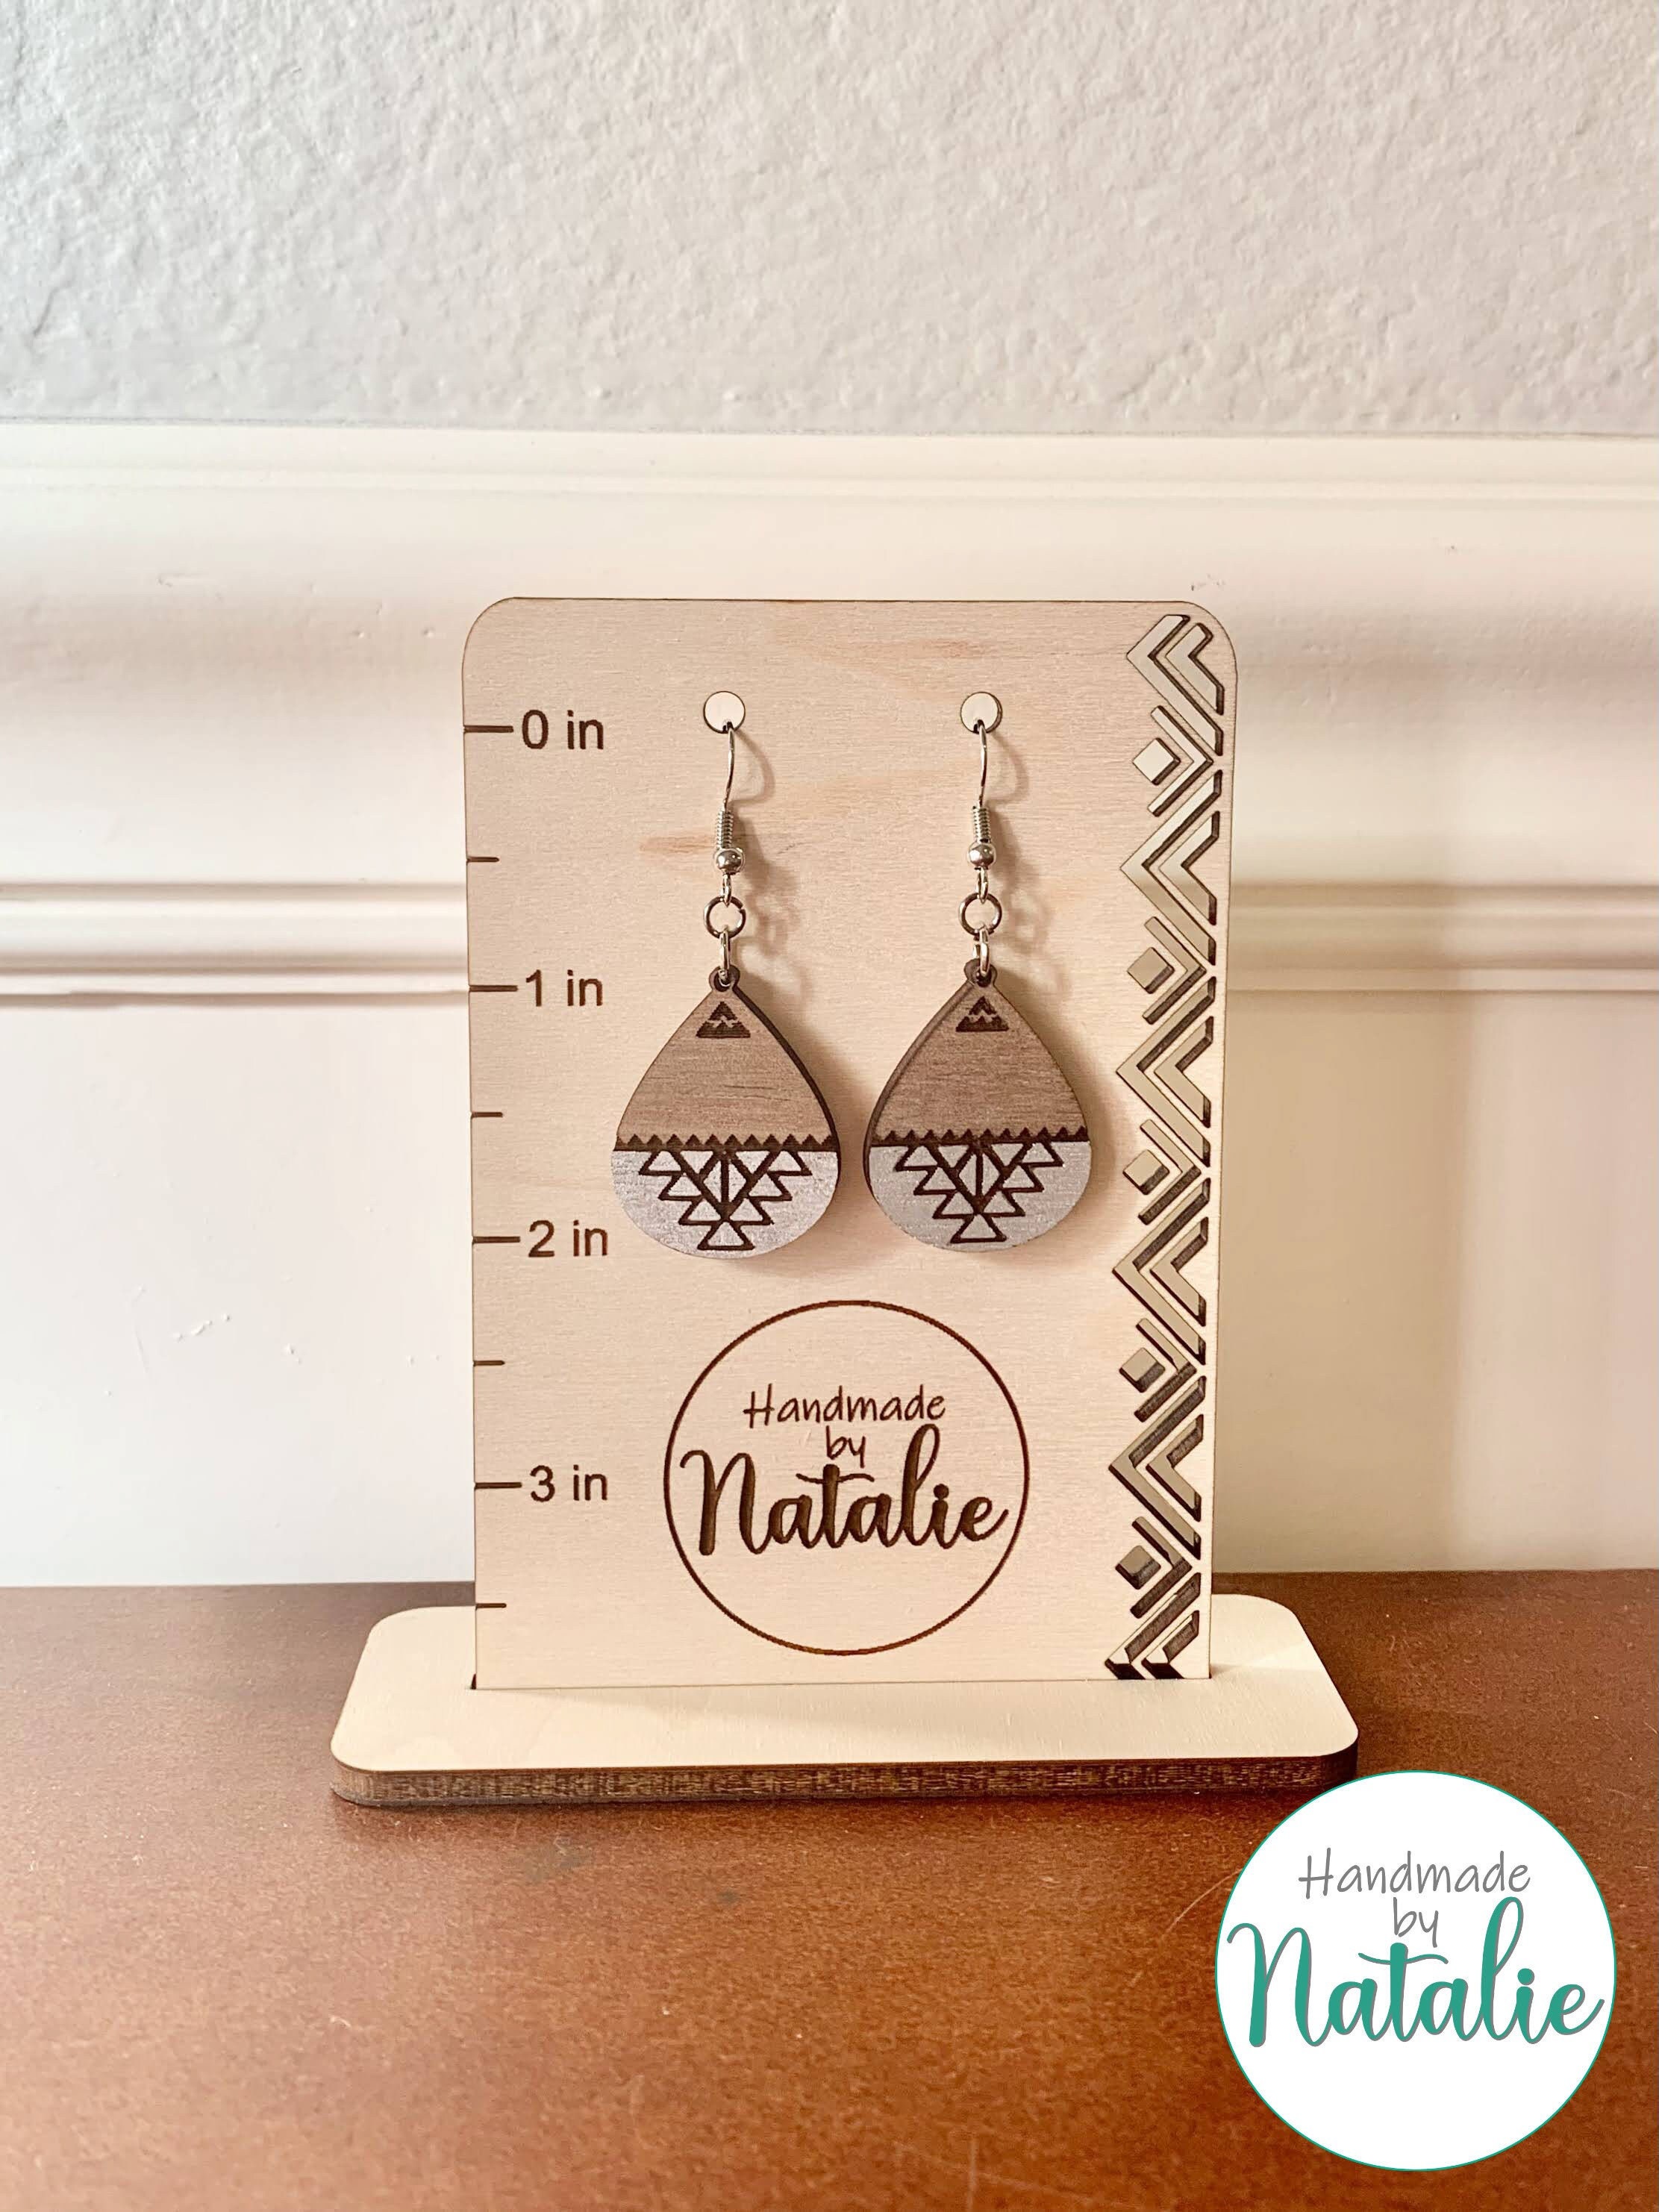 Necklace Display at Flea Markets and Any Venue You Sell At. SVG Instant  Download Digital File. 